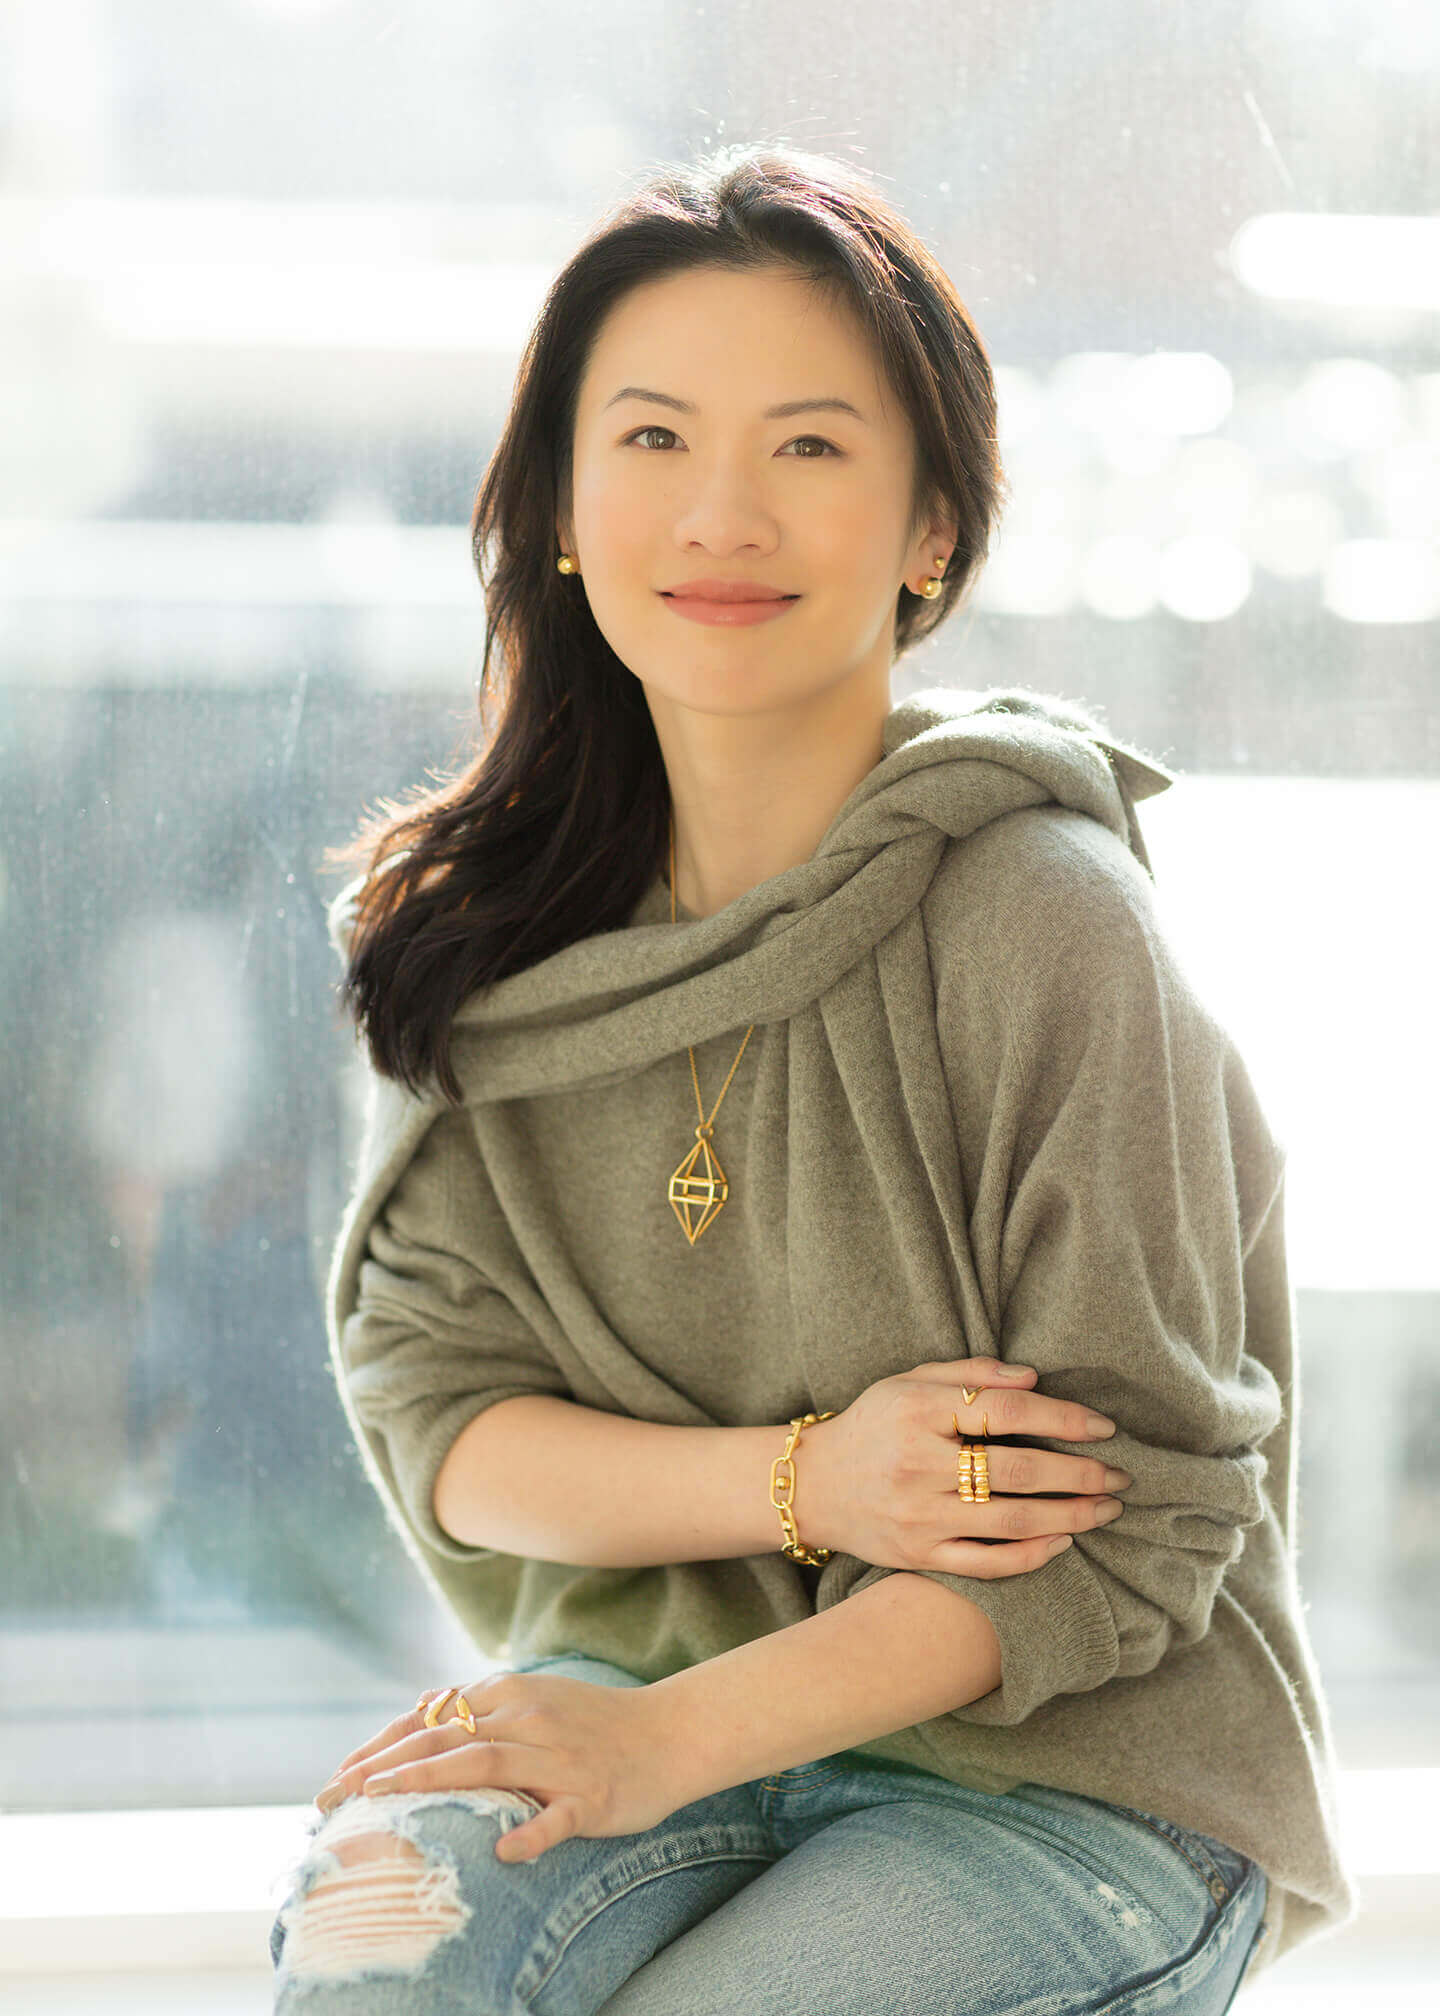 Chloe Cai is wearing Auvere 22 and 24 karat gold jewelry